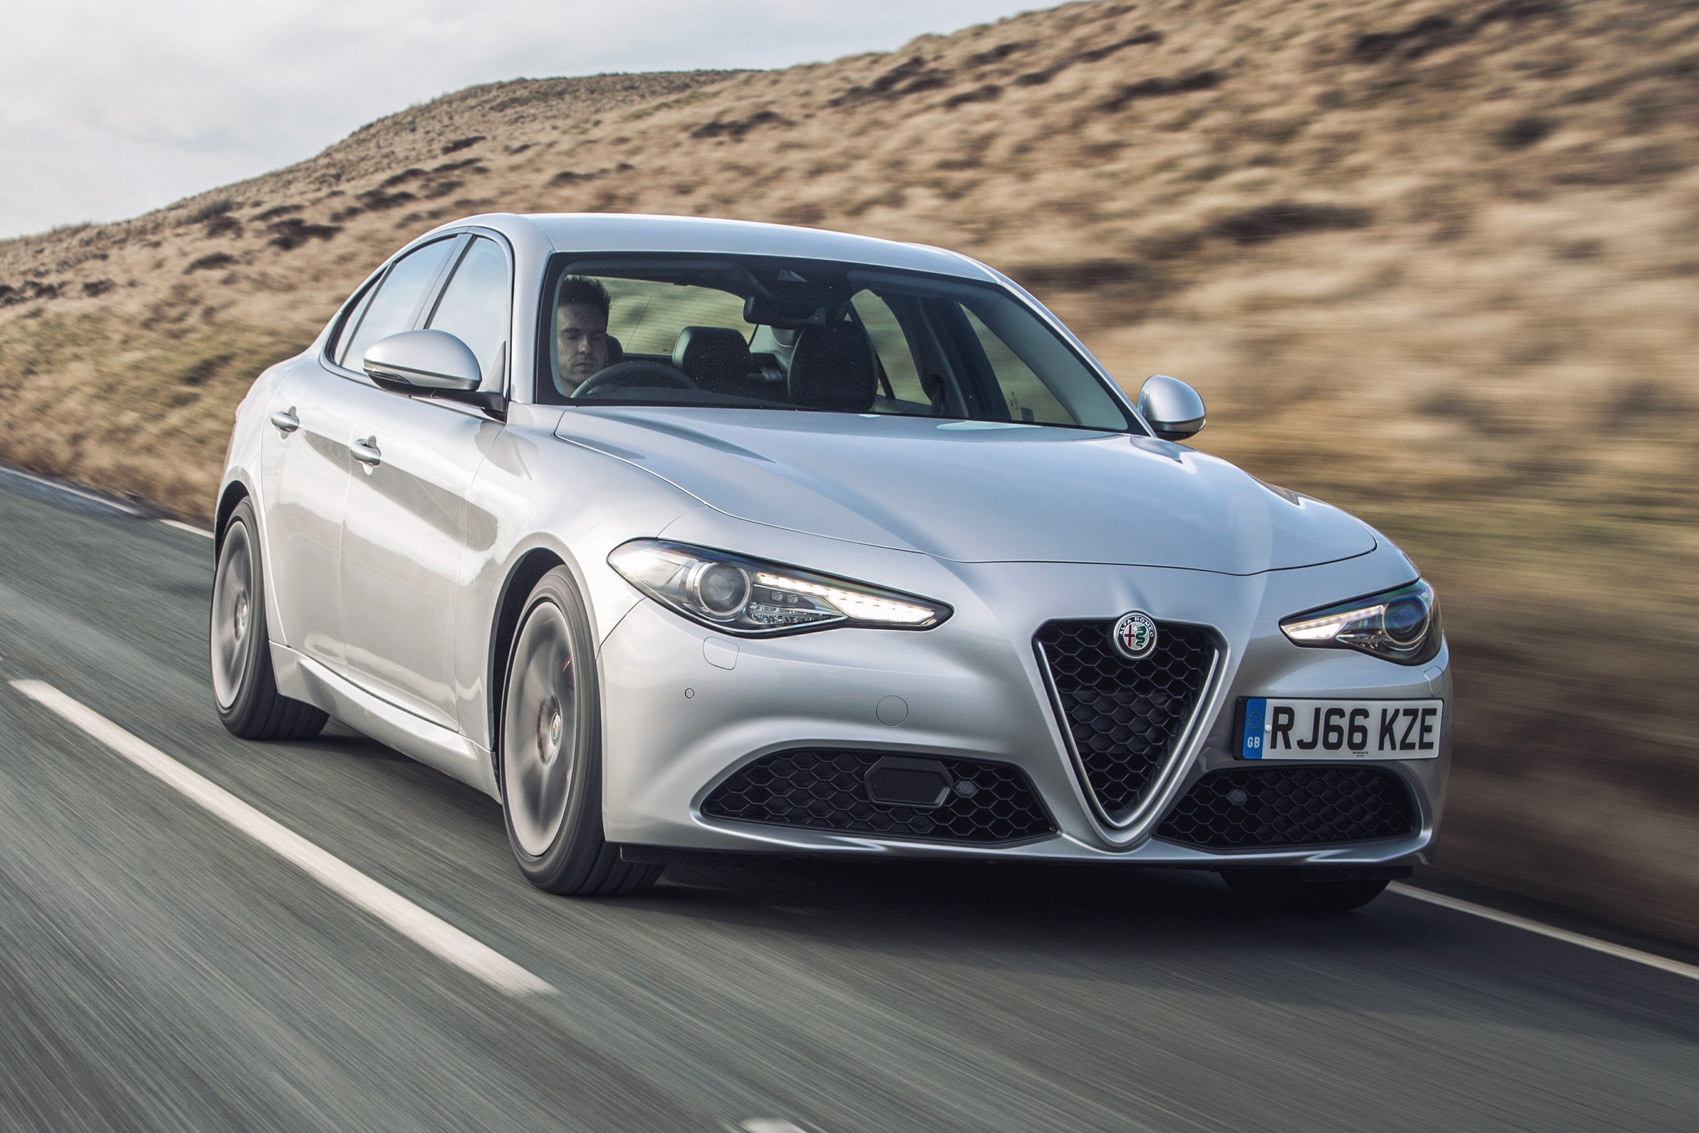 2021 Alfa Romeo Giulia Review, Pricing, & Pictures